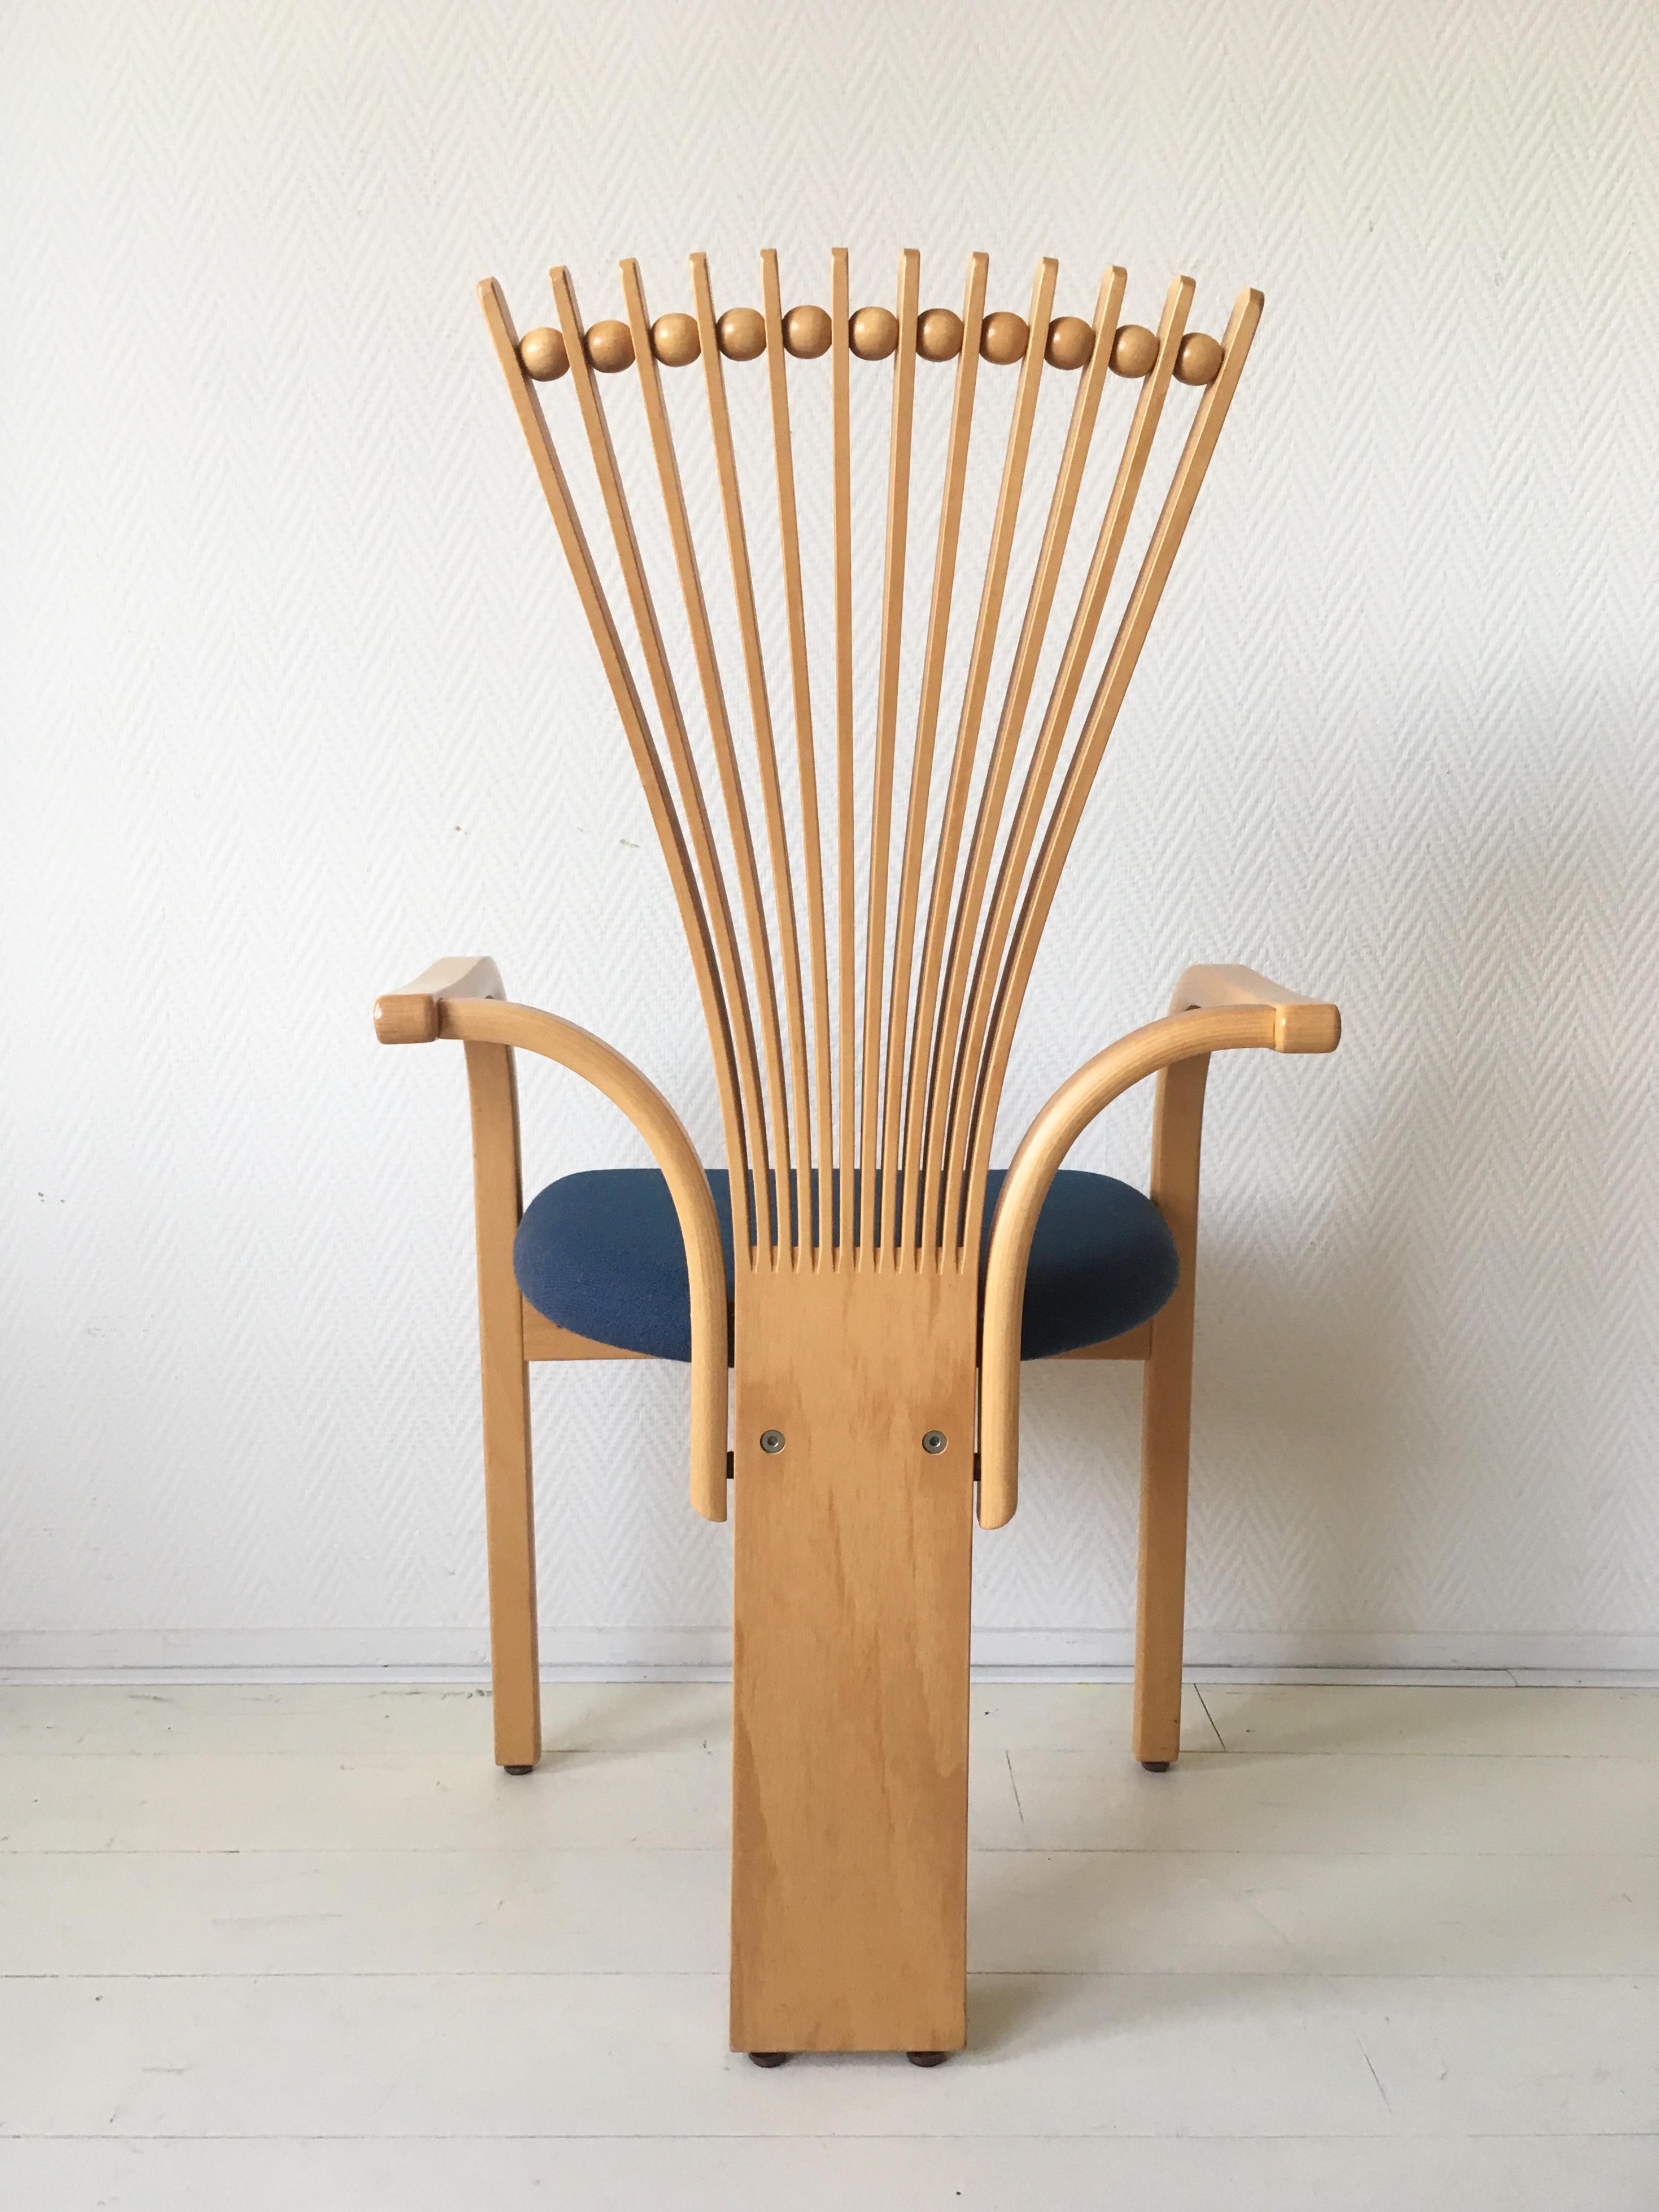 Extraordinary Memphis Style TOTEM Chairs by Torstein Nilsen for Westnofa, 1980s In Good Condition For Sale In Schagen, NL